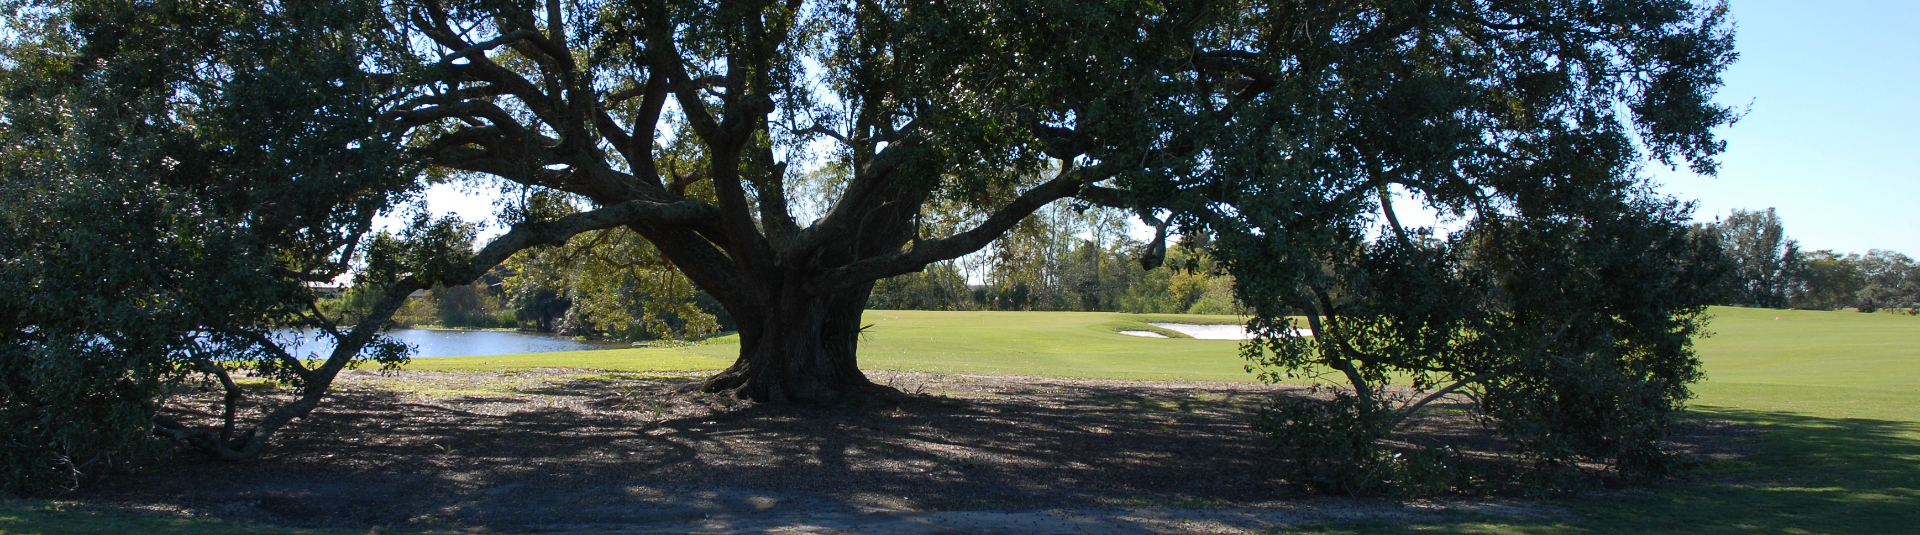 tree on golf course green